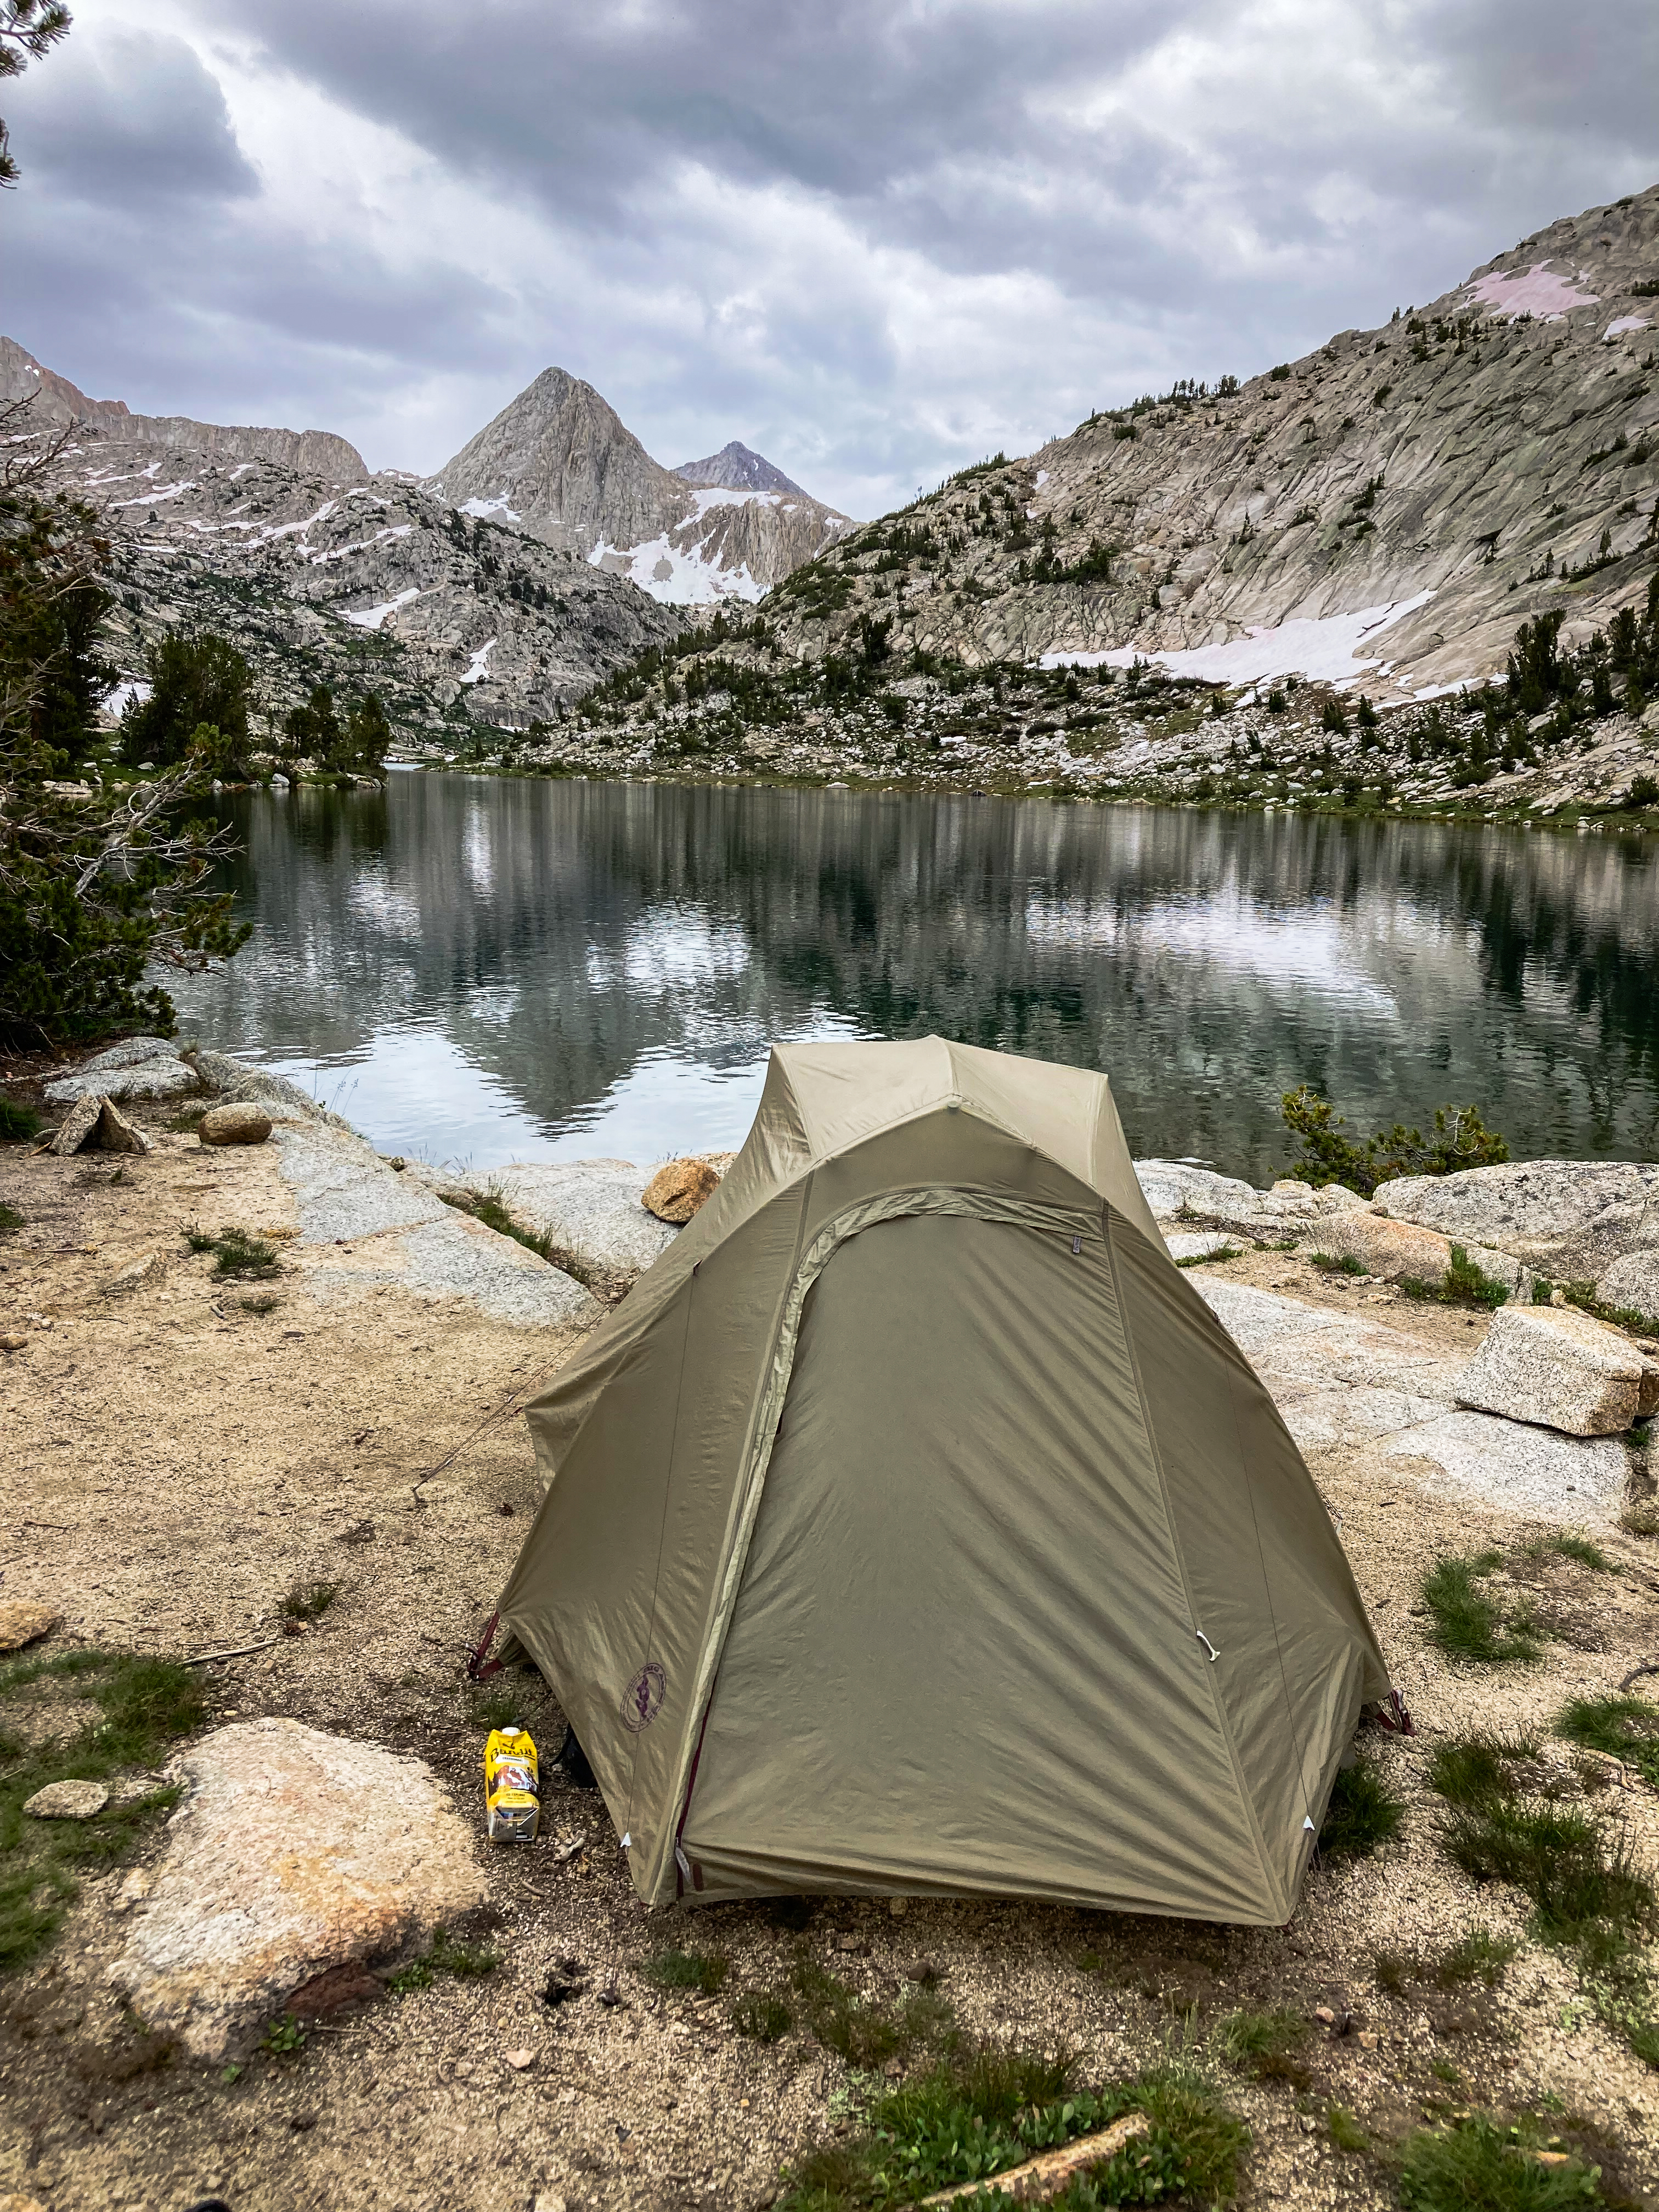 Our Big Agnes tent at Evolution Lake in Kings Canyon National Park